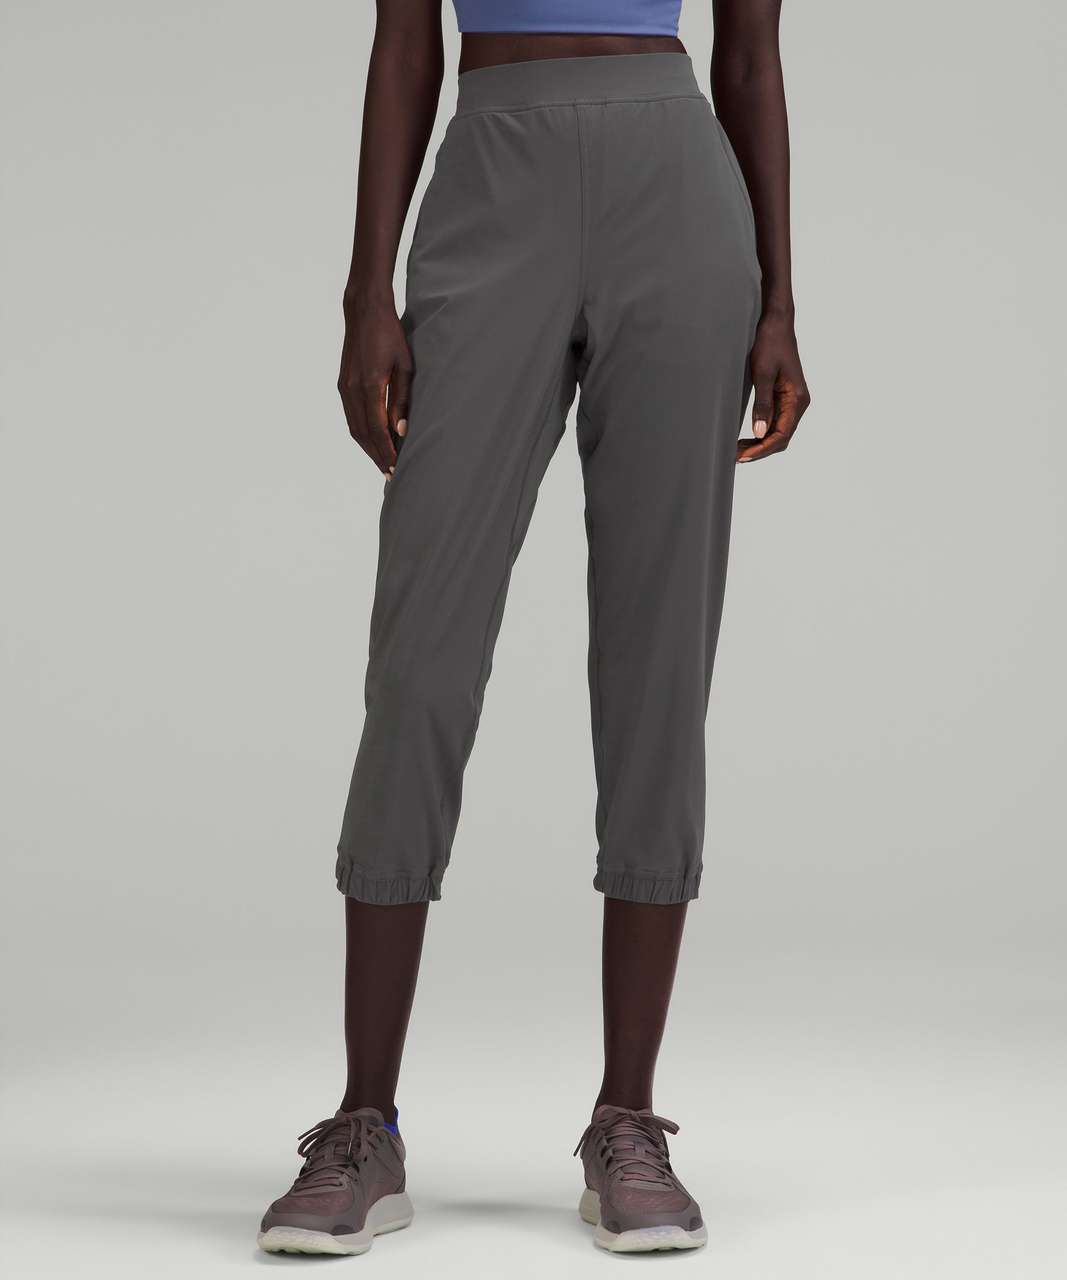 NWT Lululemon Adapted State HR Jogger Size 4 Rhino Grey 28” Sold Out! 